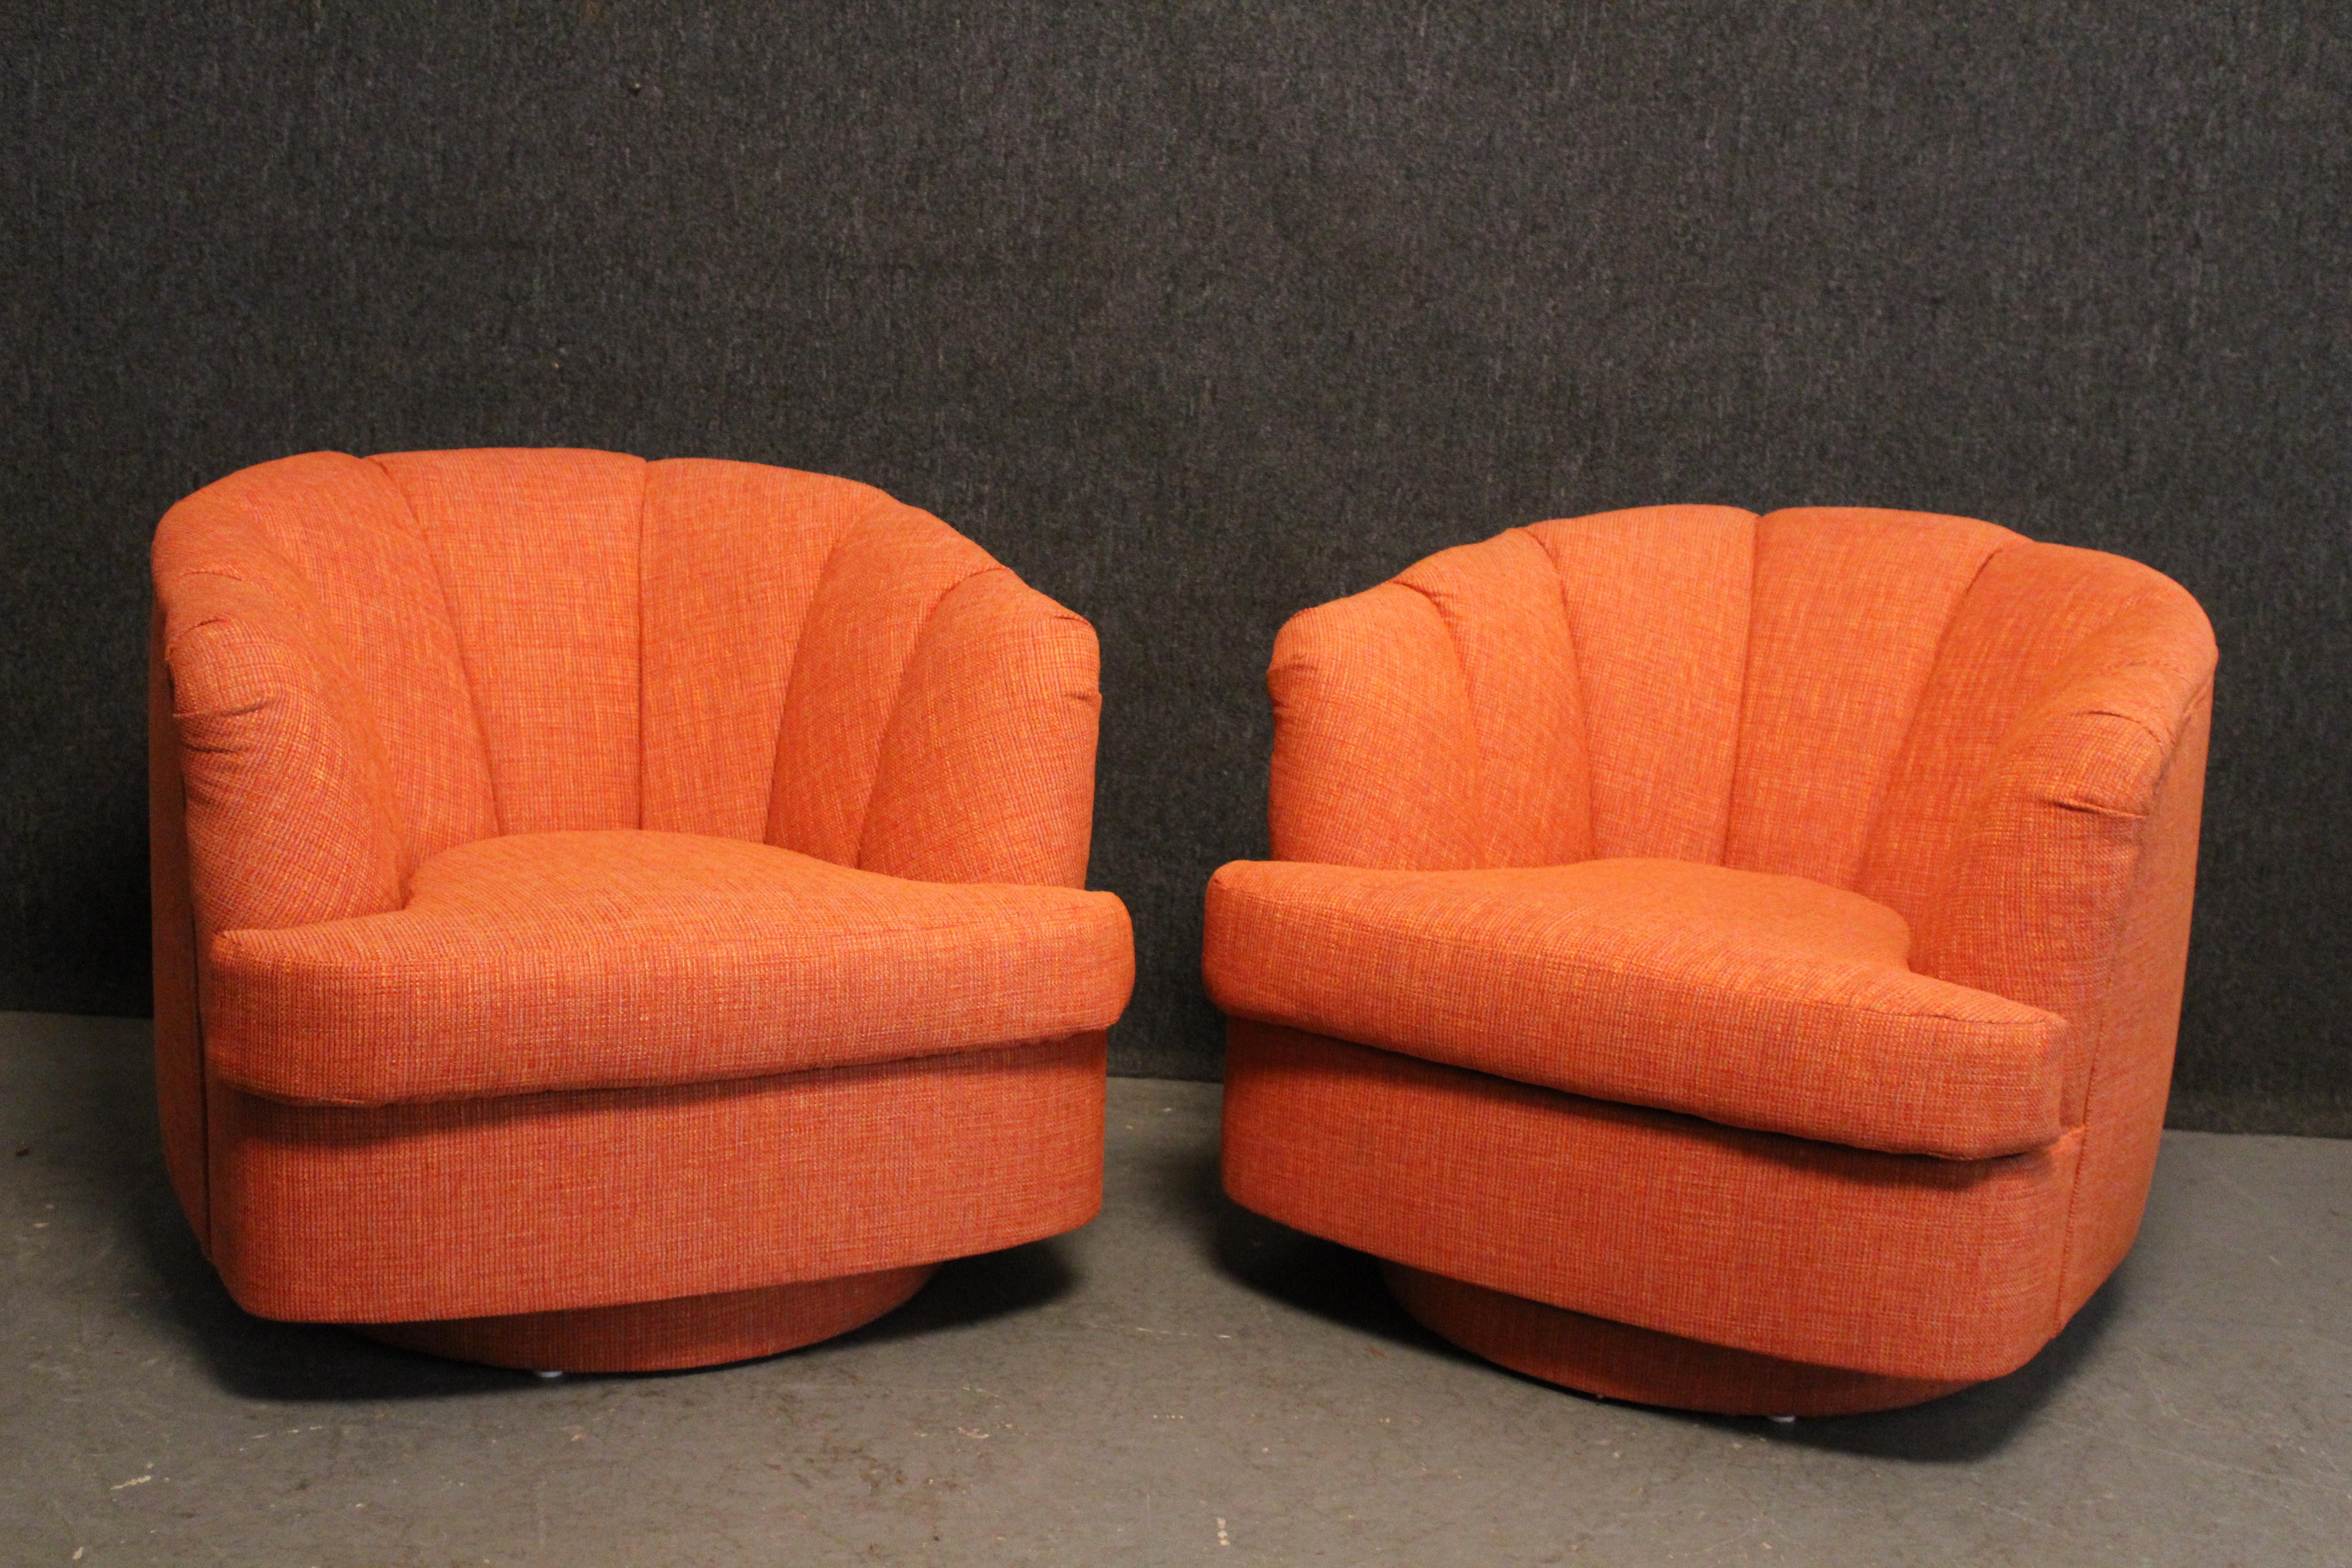 20th Century Reupholstered Mid-Century Swivel Chairs by Directional Furniture